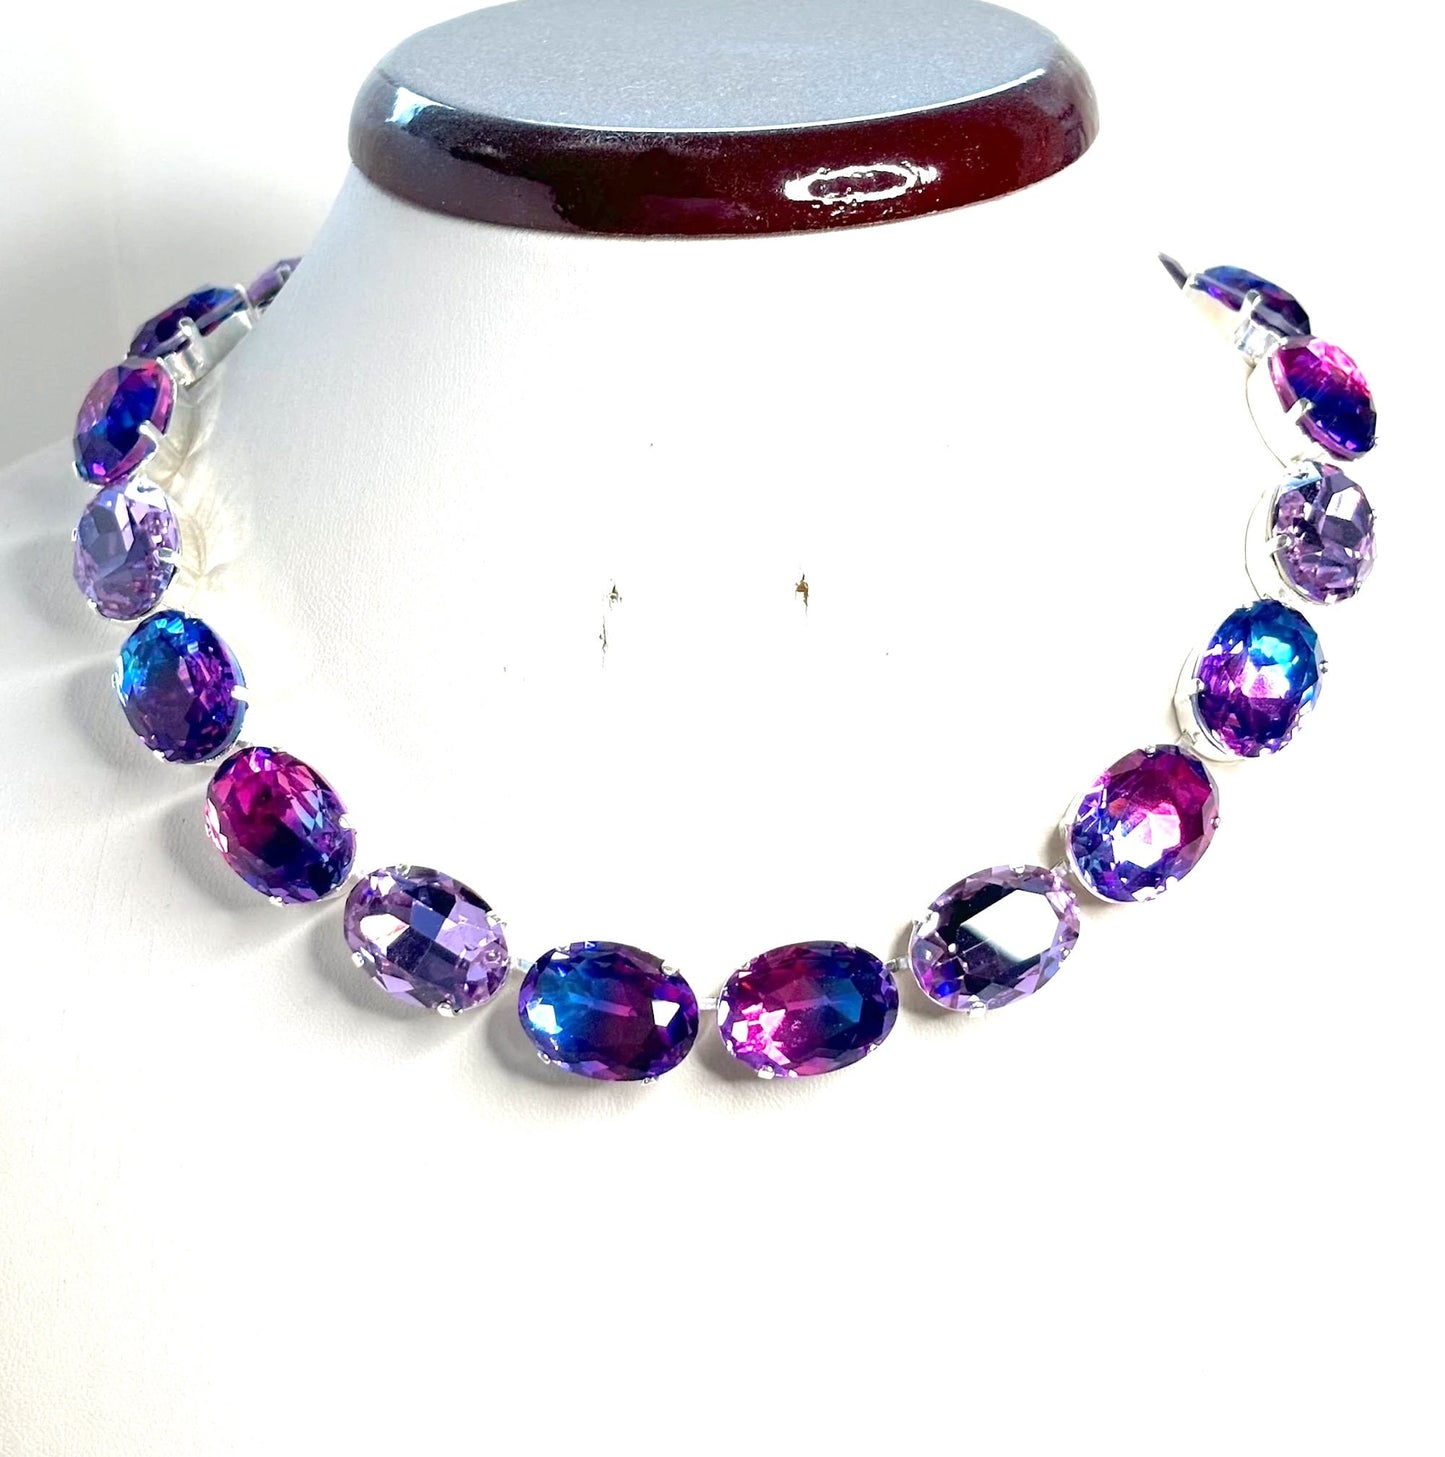 Violet Tourmaline Crystal Georgian Collet Necklace | Anna Wintour Style | Purple Crystal Statement Riviere Choker